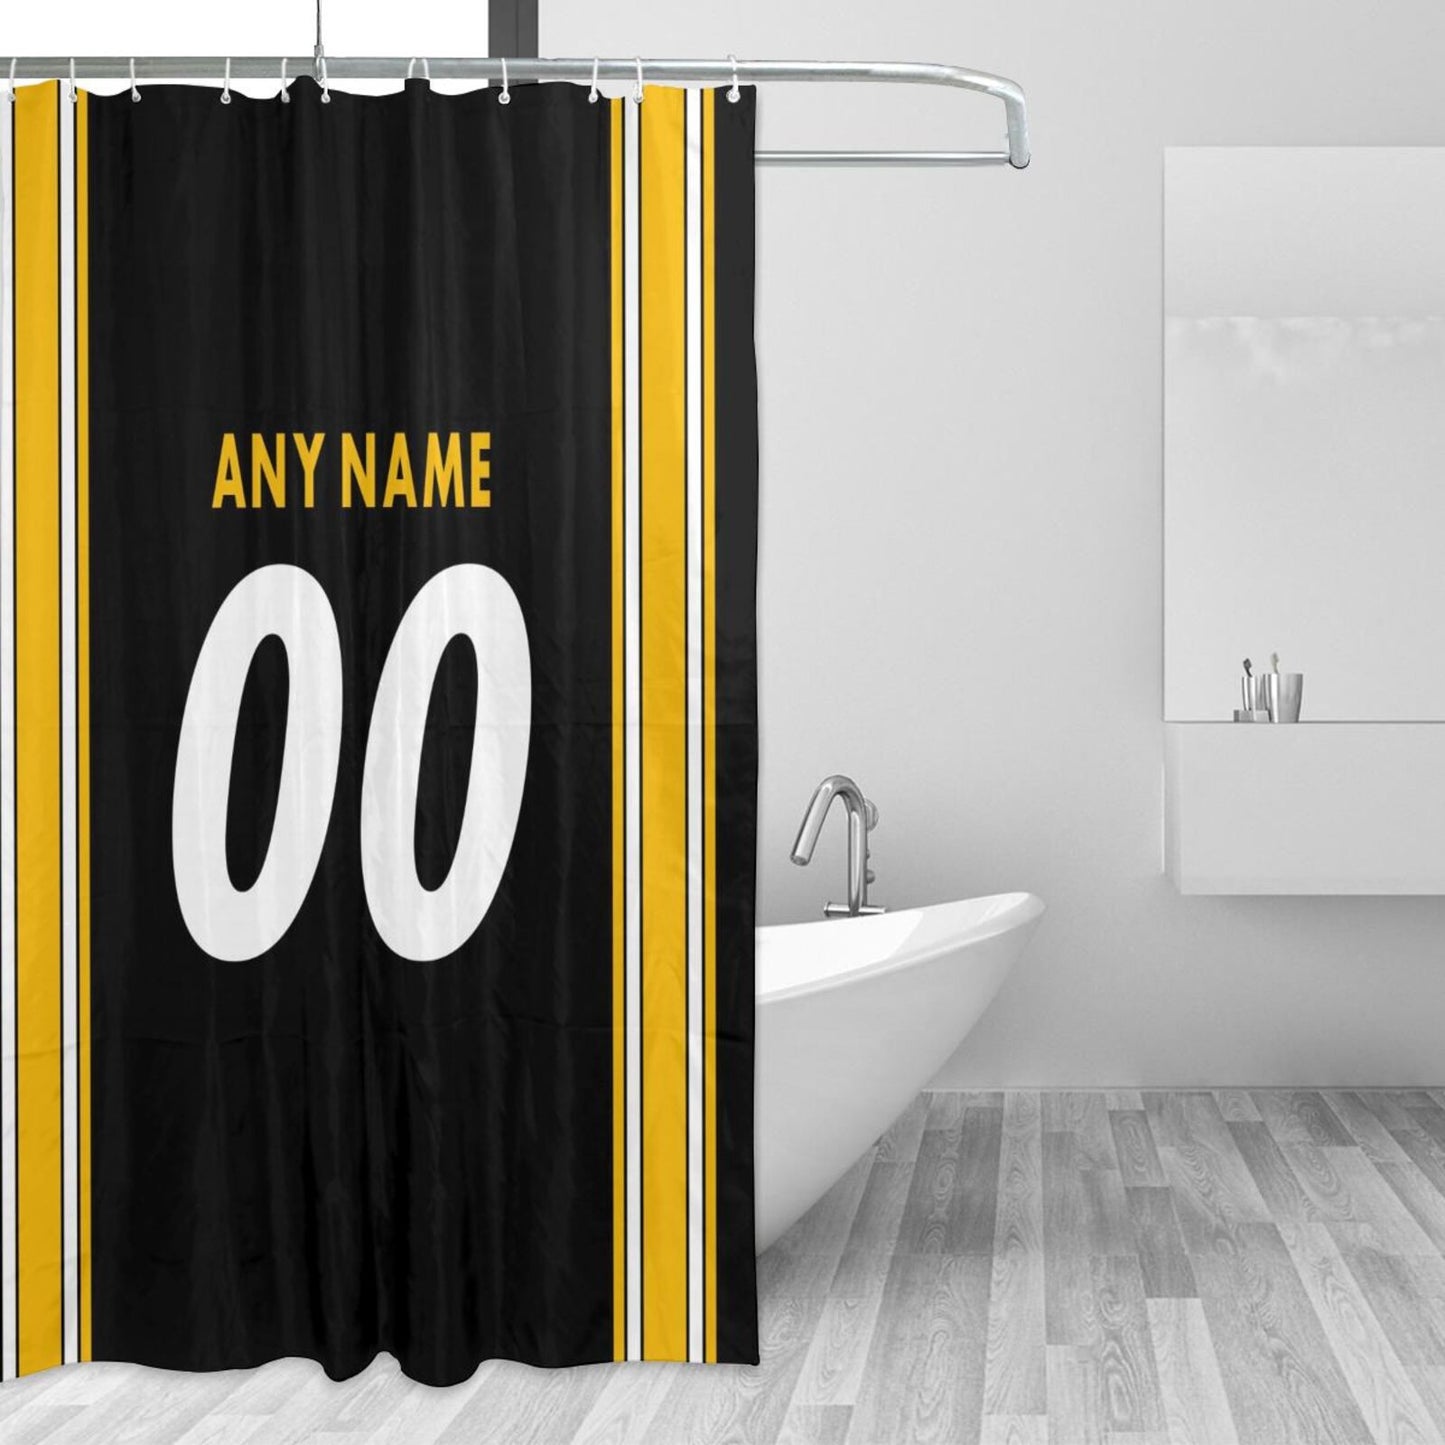 Custom Football Pittsburgh Steelers style personalized shower curtain custom design name and number set of 12 shower curtain hooks Rings